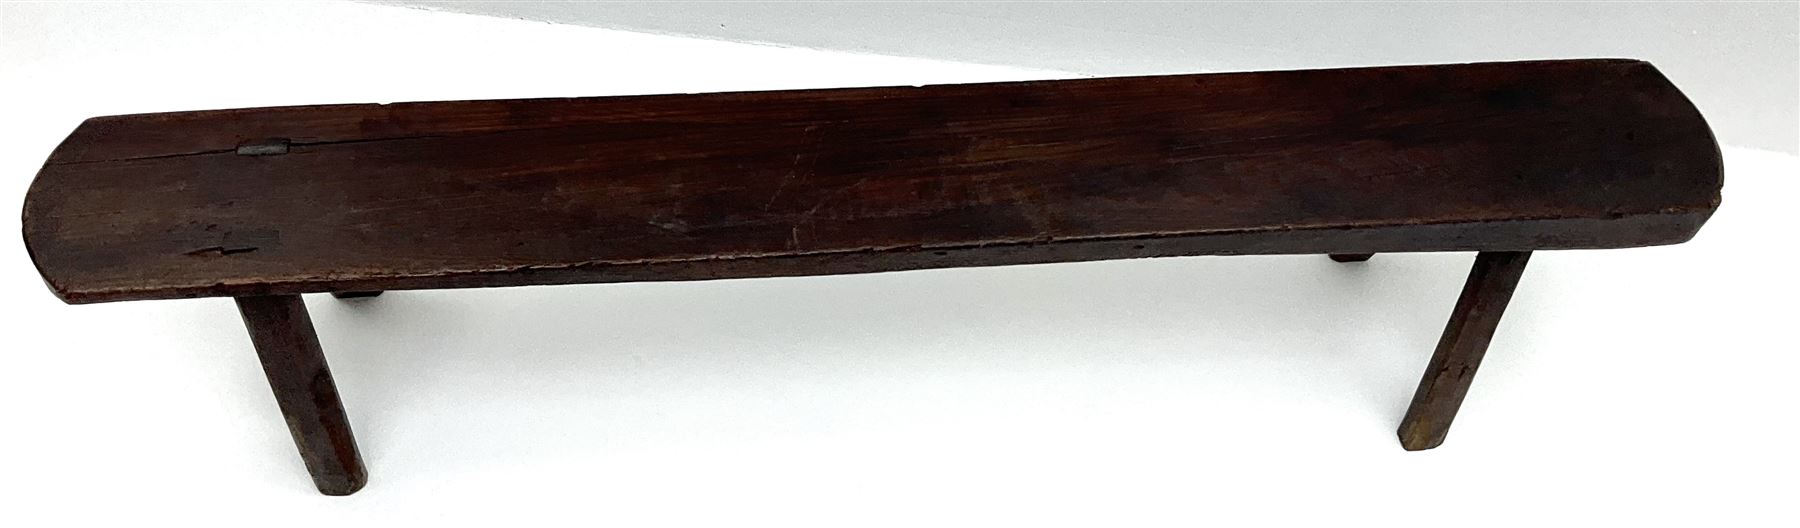 18th/19th century vernacular rustic oak plank bench on four splayed supports - Image 3 of 3